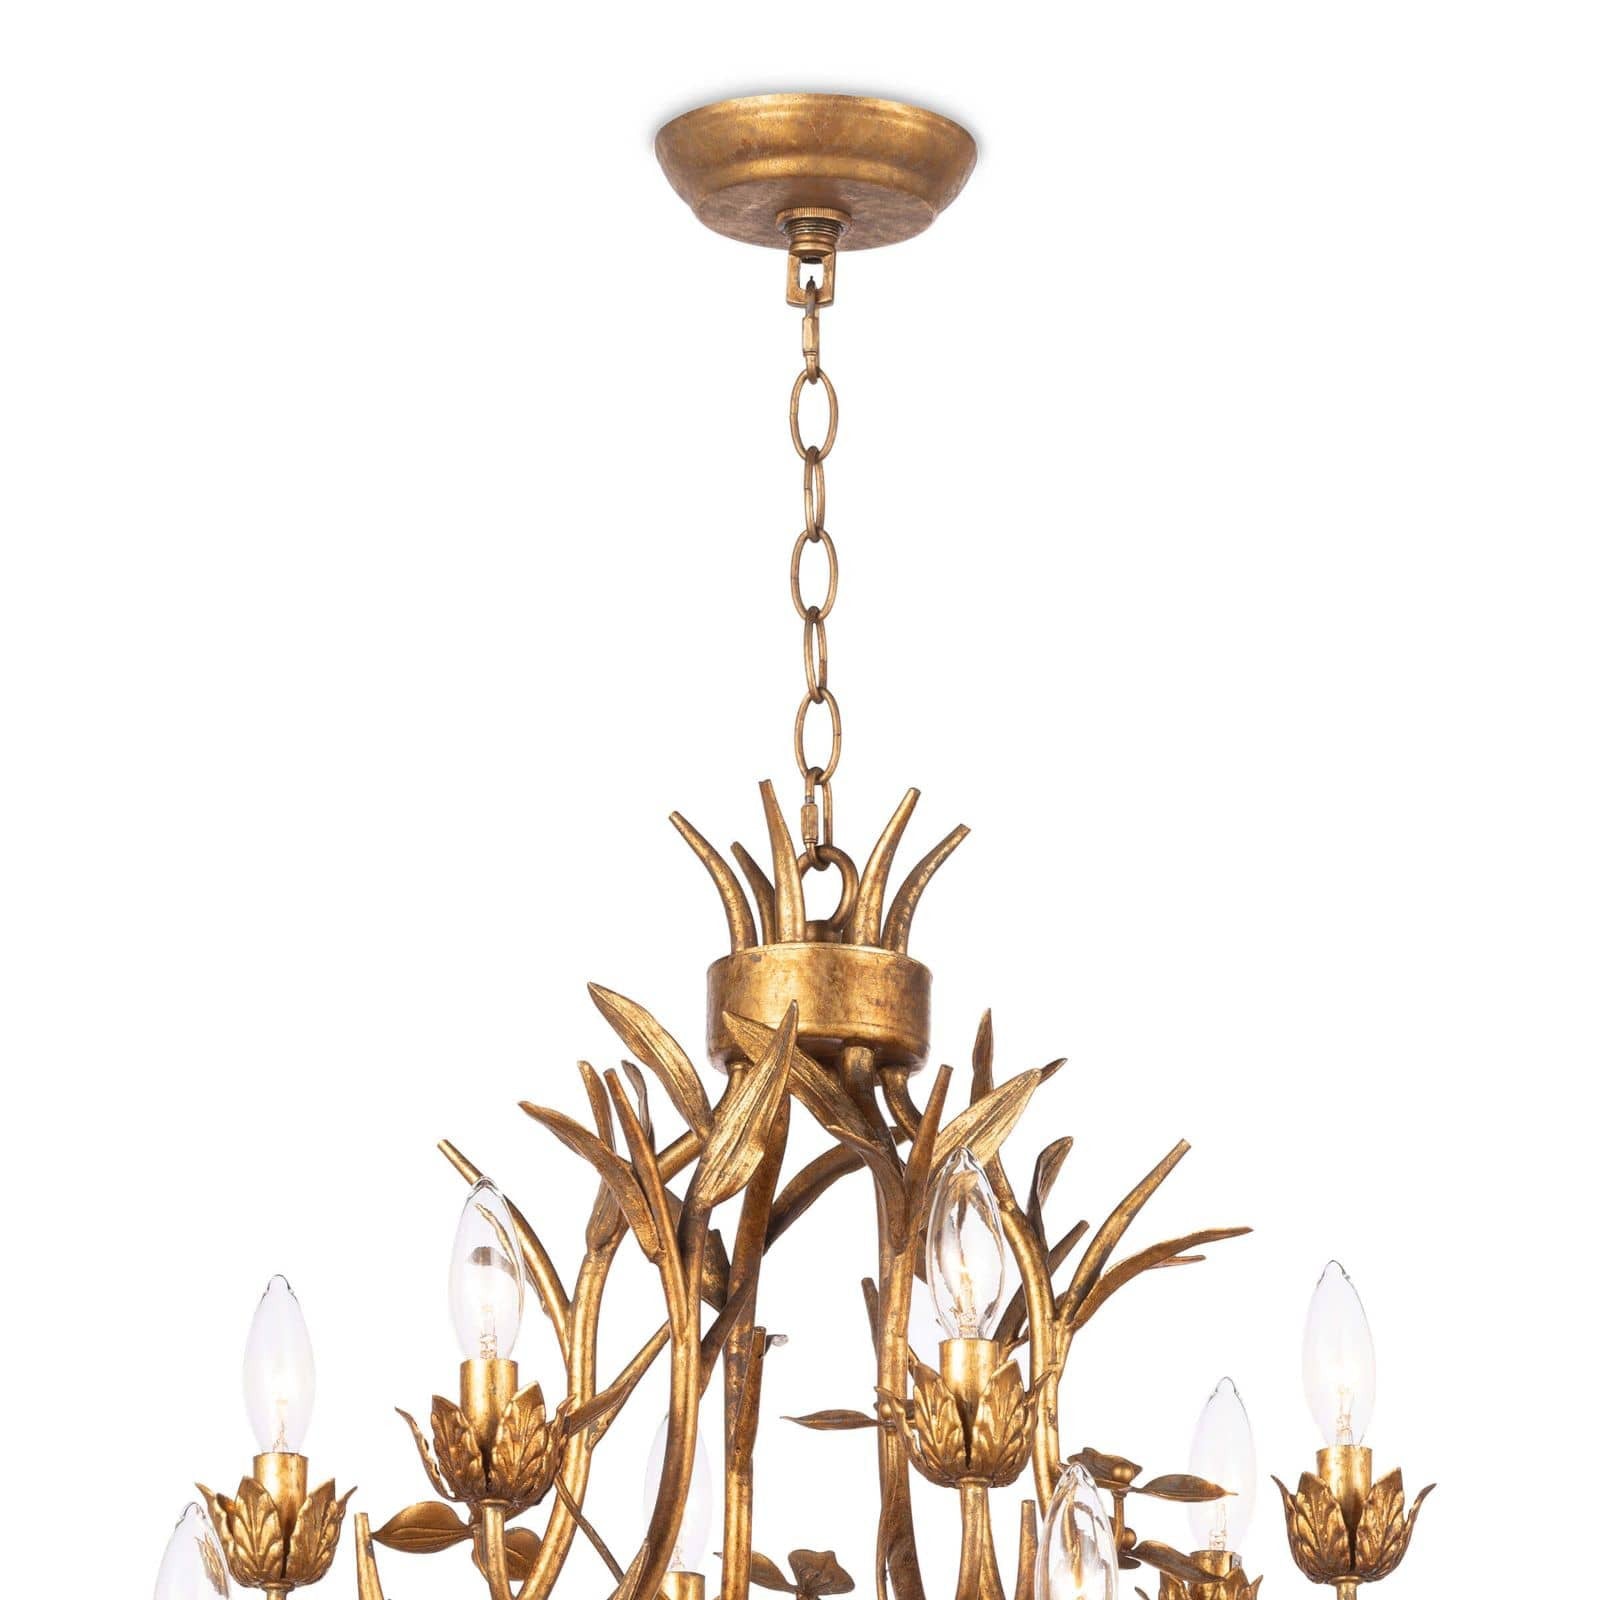 We love the vintage charm of this Trillium Chandelier by Regina Andrew with its detailed flowers and branches gilded in gold leaf. An elegant chandelier to place in any living room, entry way, or dining room.   Overall Dimension: 34"w x 34"d x 39"h 